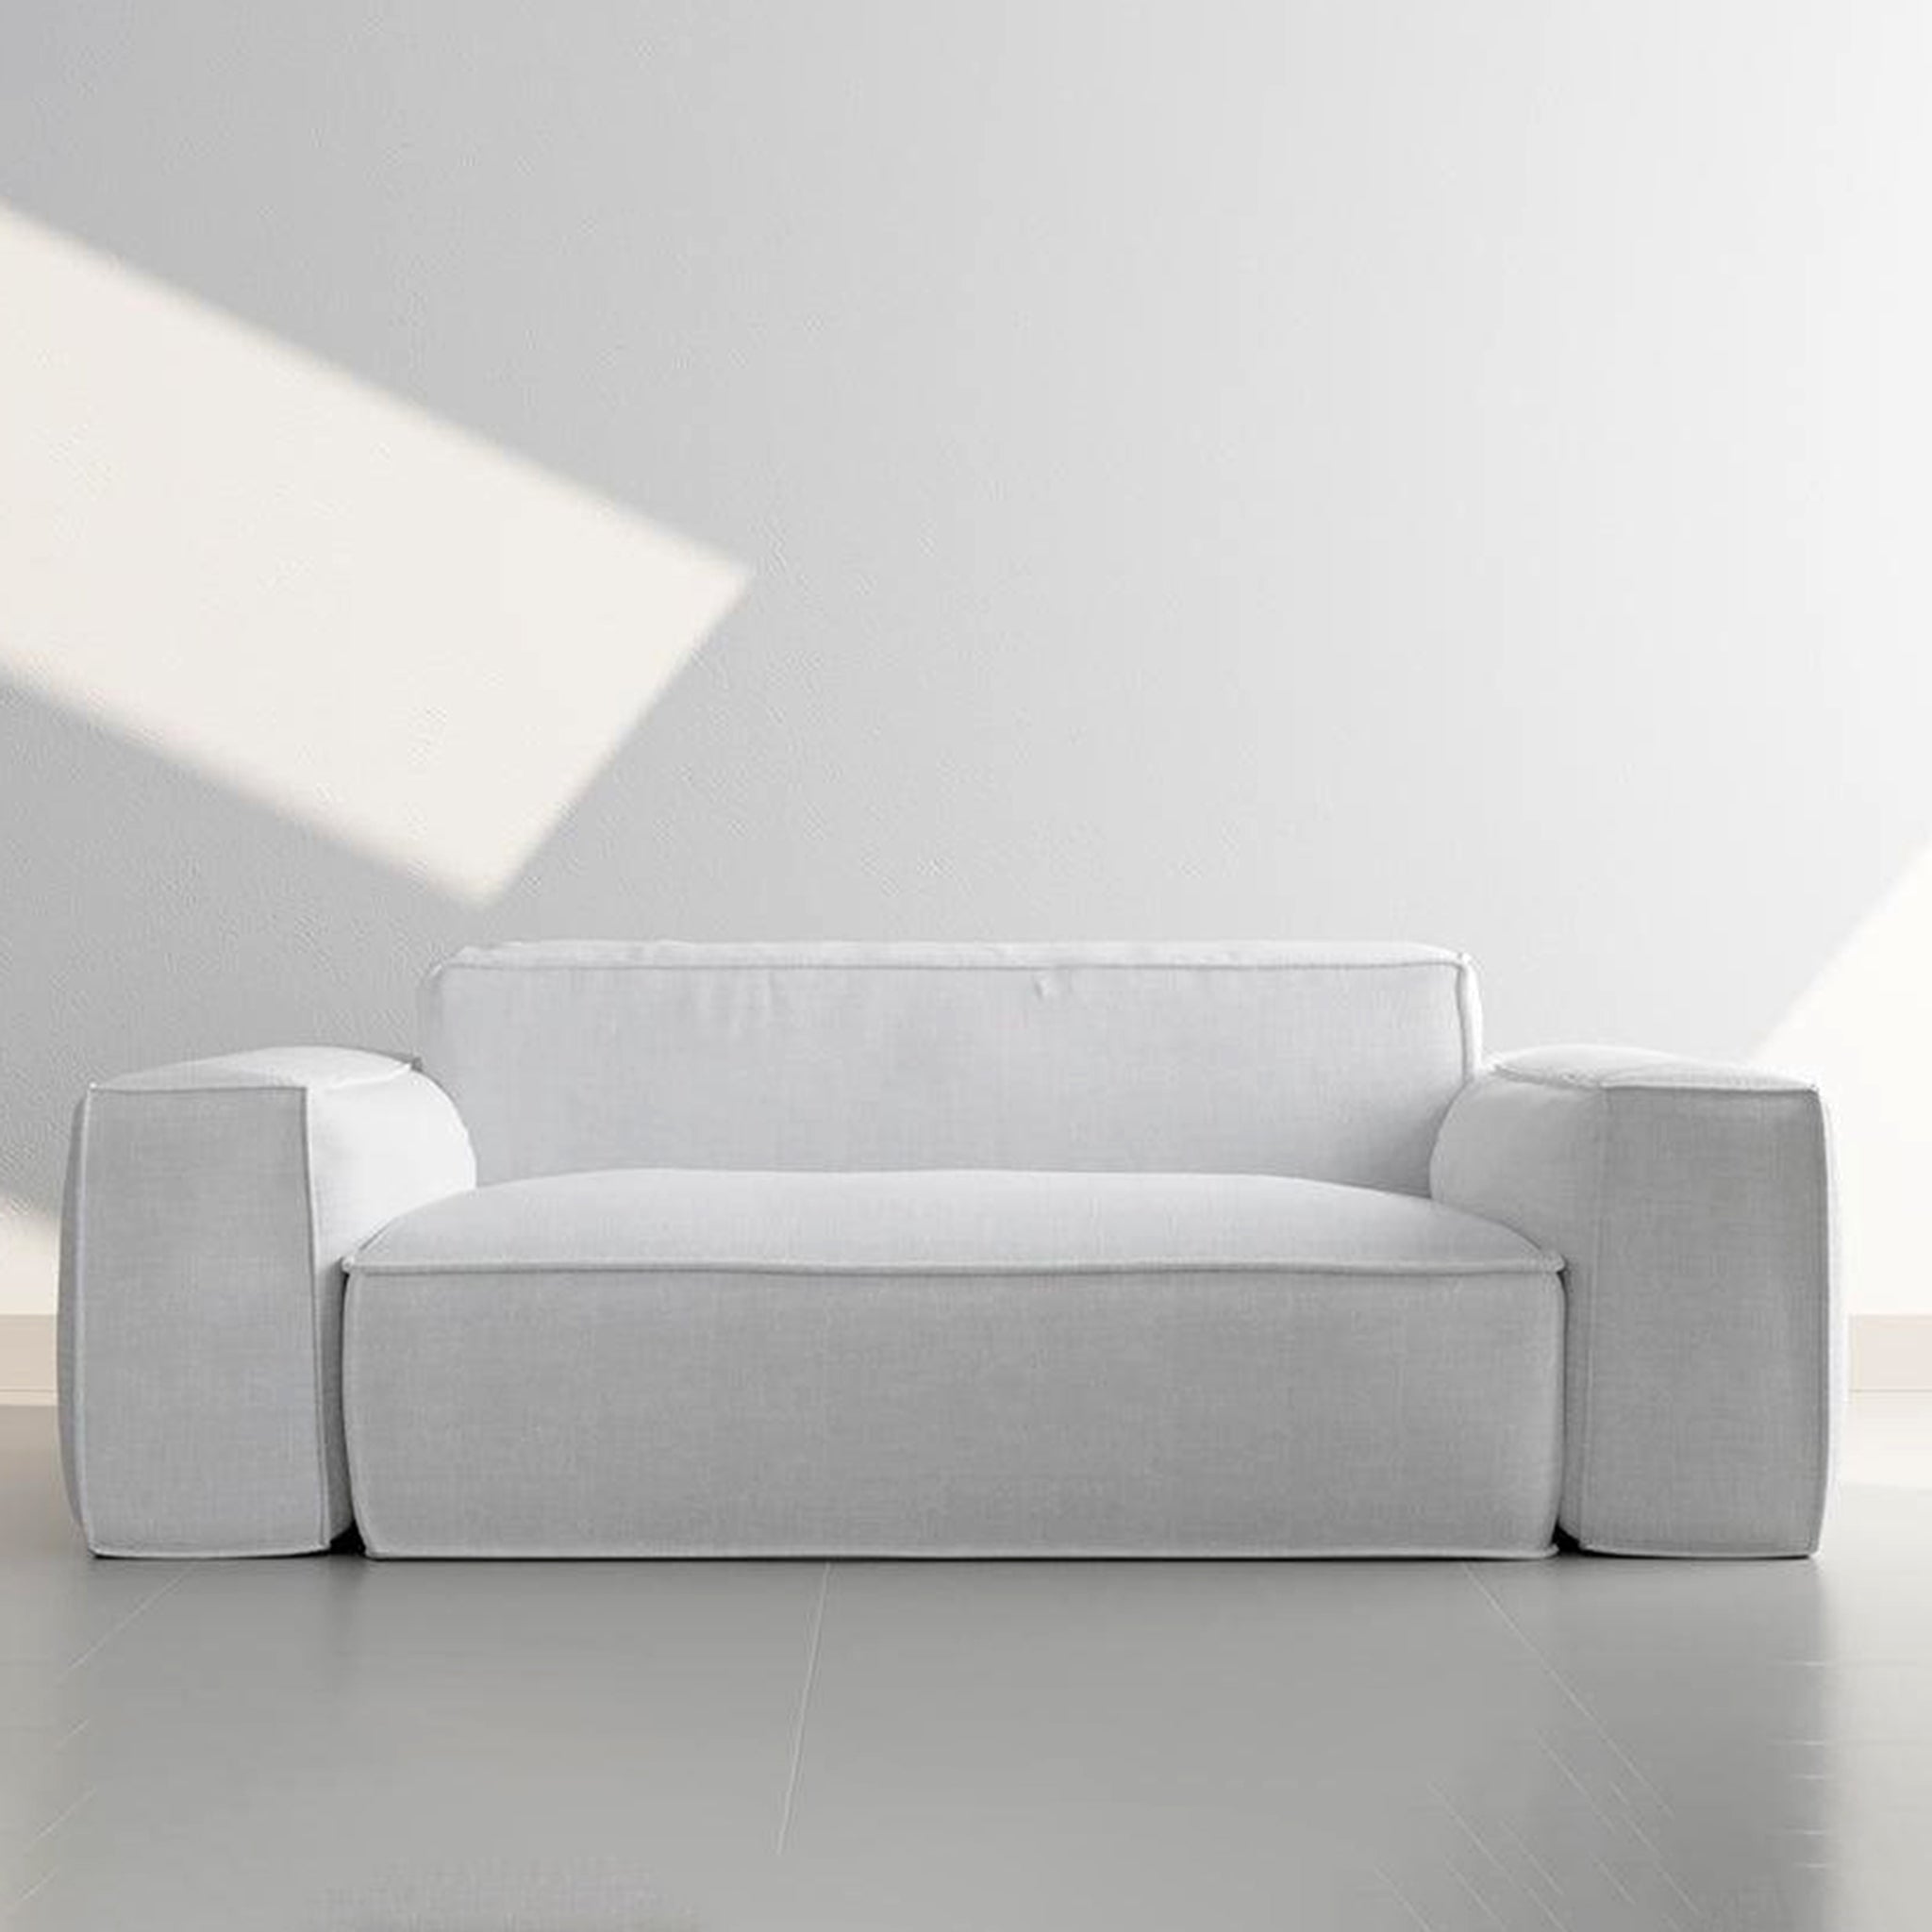 Comfortable beige couch with plush cushions in a minimalist living space. 